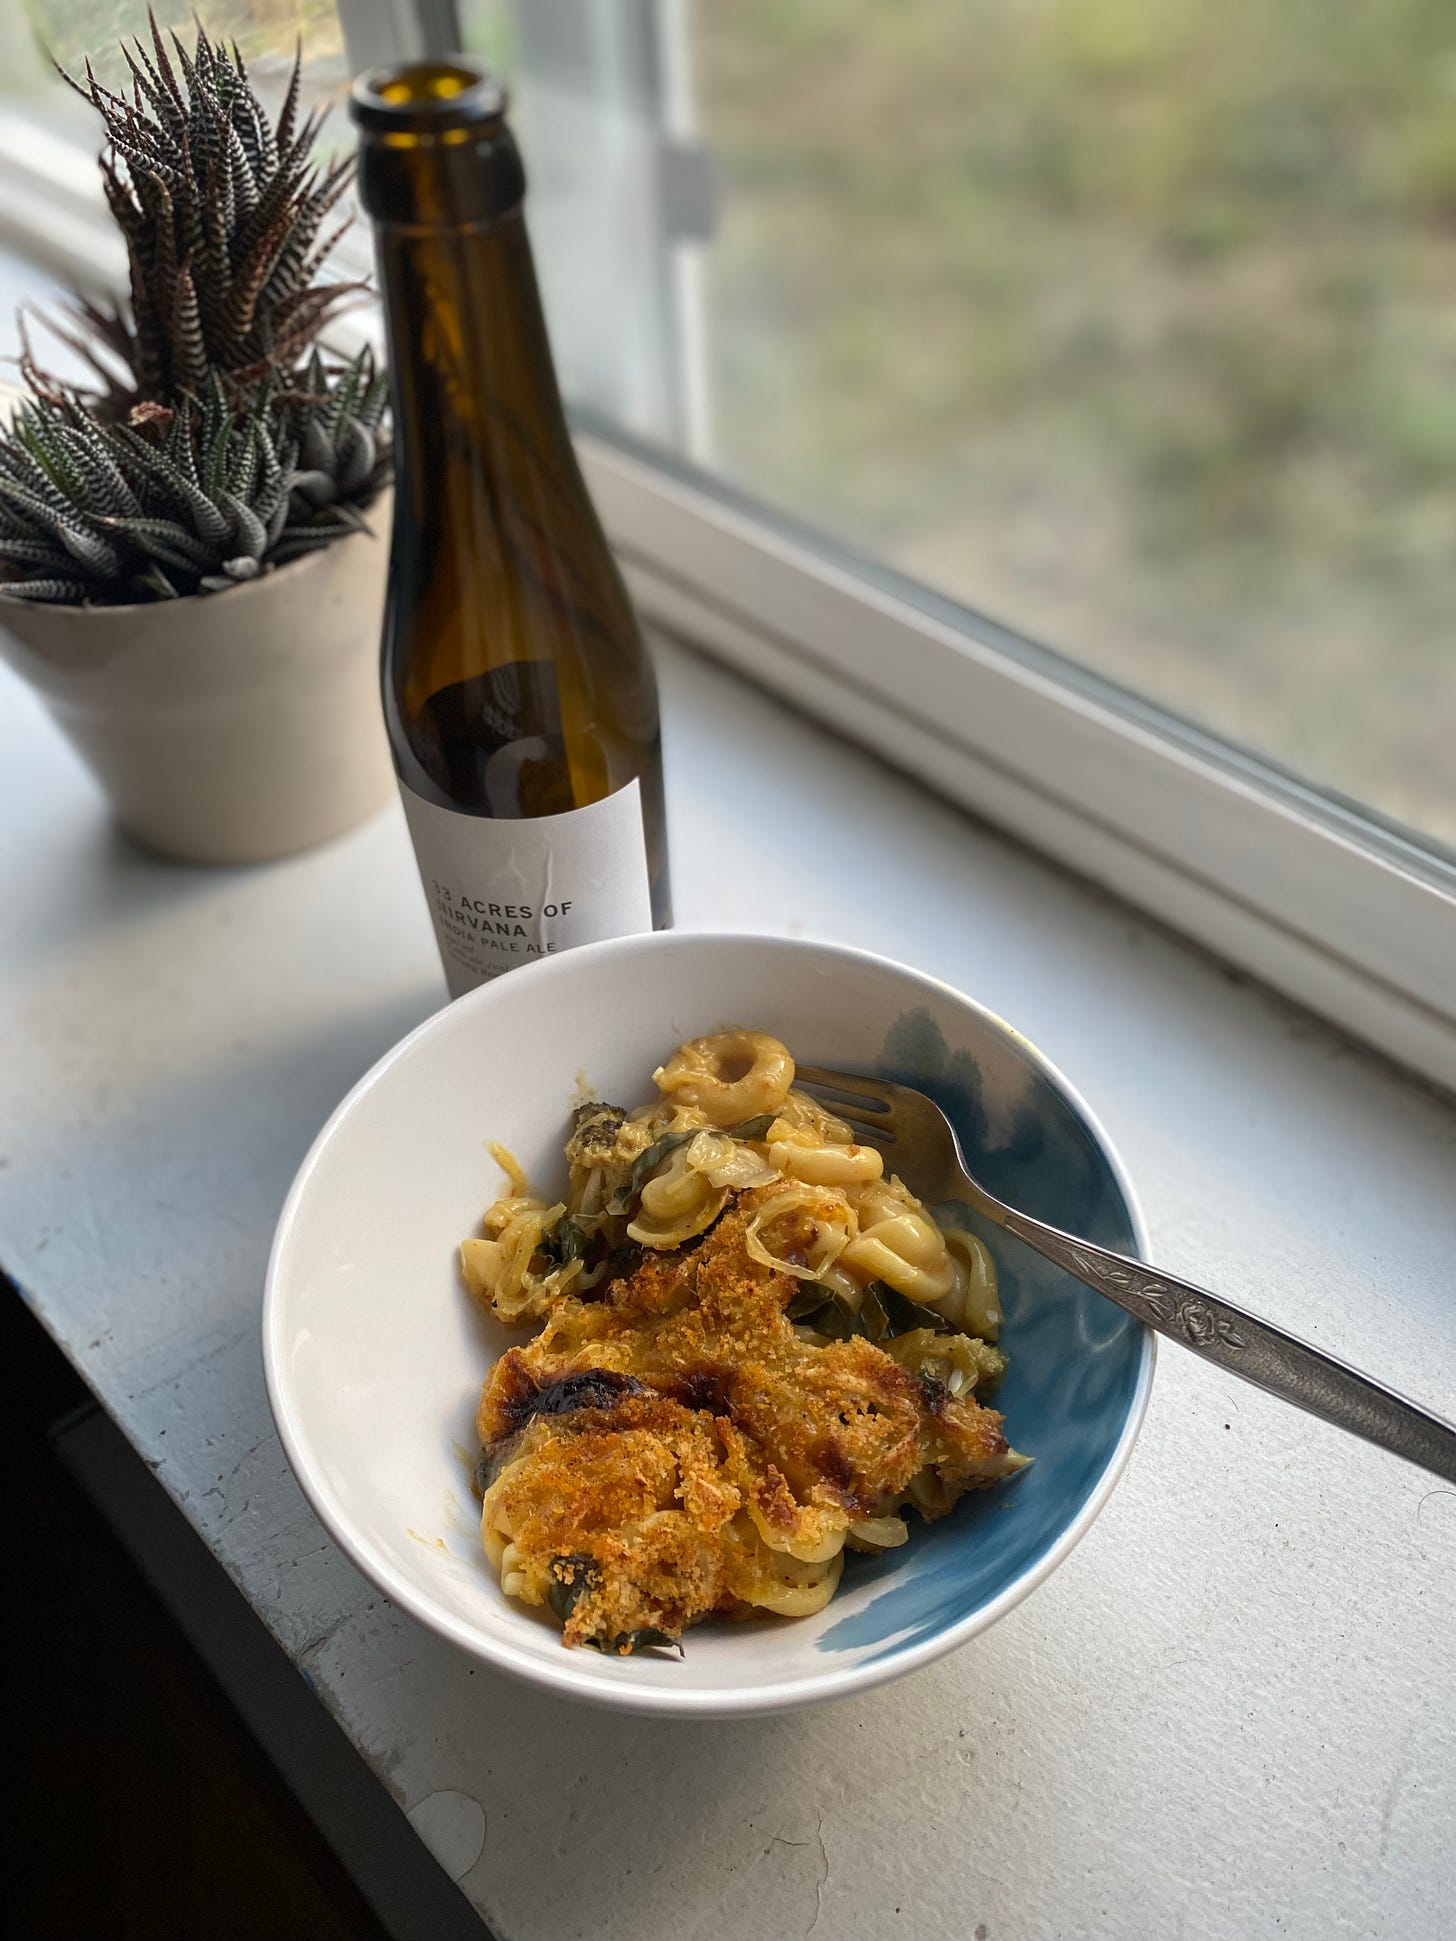 On a windowsill, a white and blue bowl of baked mac & cheeze with kale pieces visible throughout, browned cheese and breadcrumbs on top. Next to it is a bottle of beer, '33 Acres of Nirvana'. Behind them both is a houseplant in a white pot.